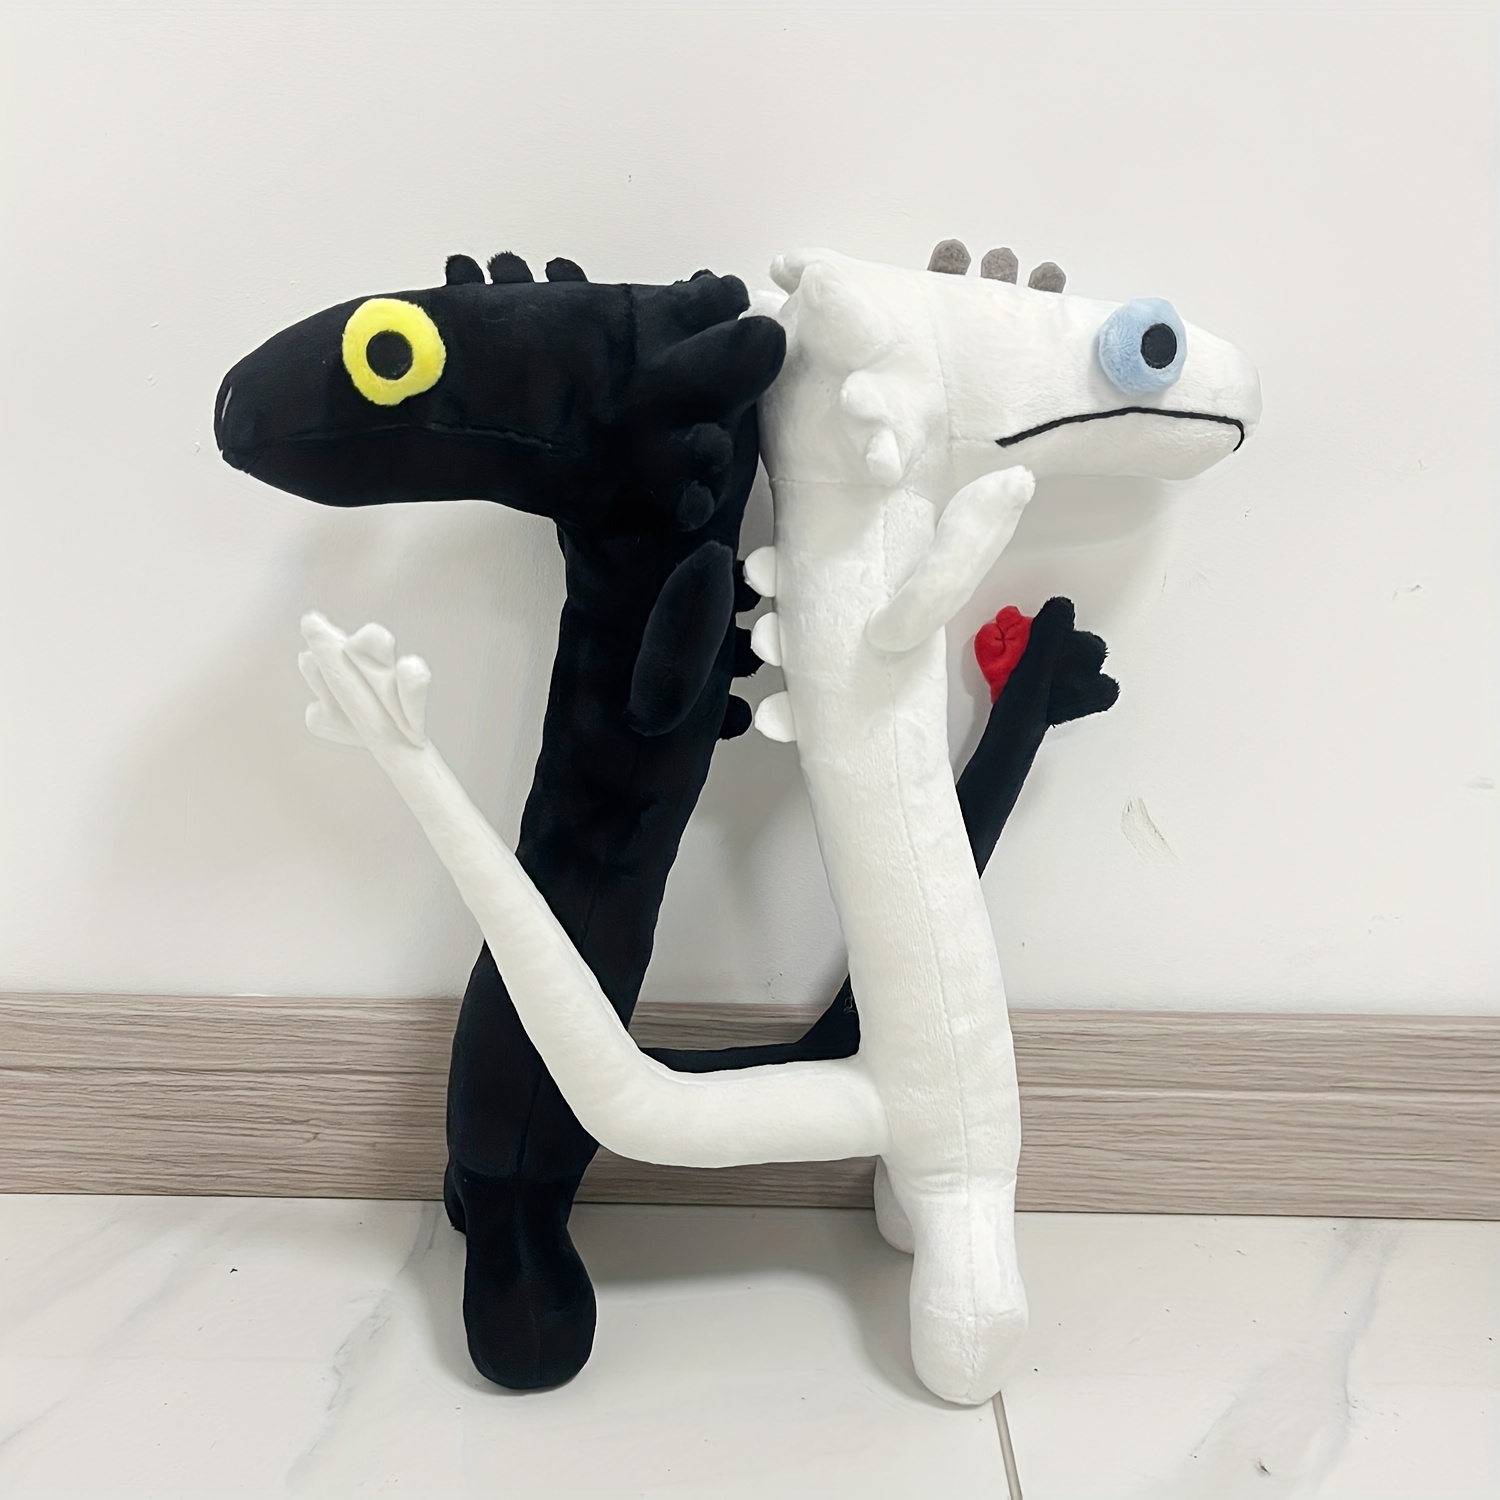 

1pc Toothless Dance Plush Doll Cute Toothless Plush Toy, Anime Plush Toothless Stuffed White Black Dragon Doll Friends Gift Home Decor Valentine's Day Gift Easter Gift